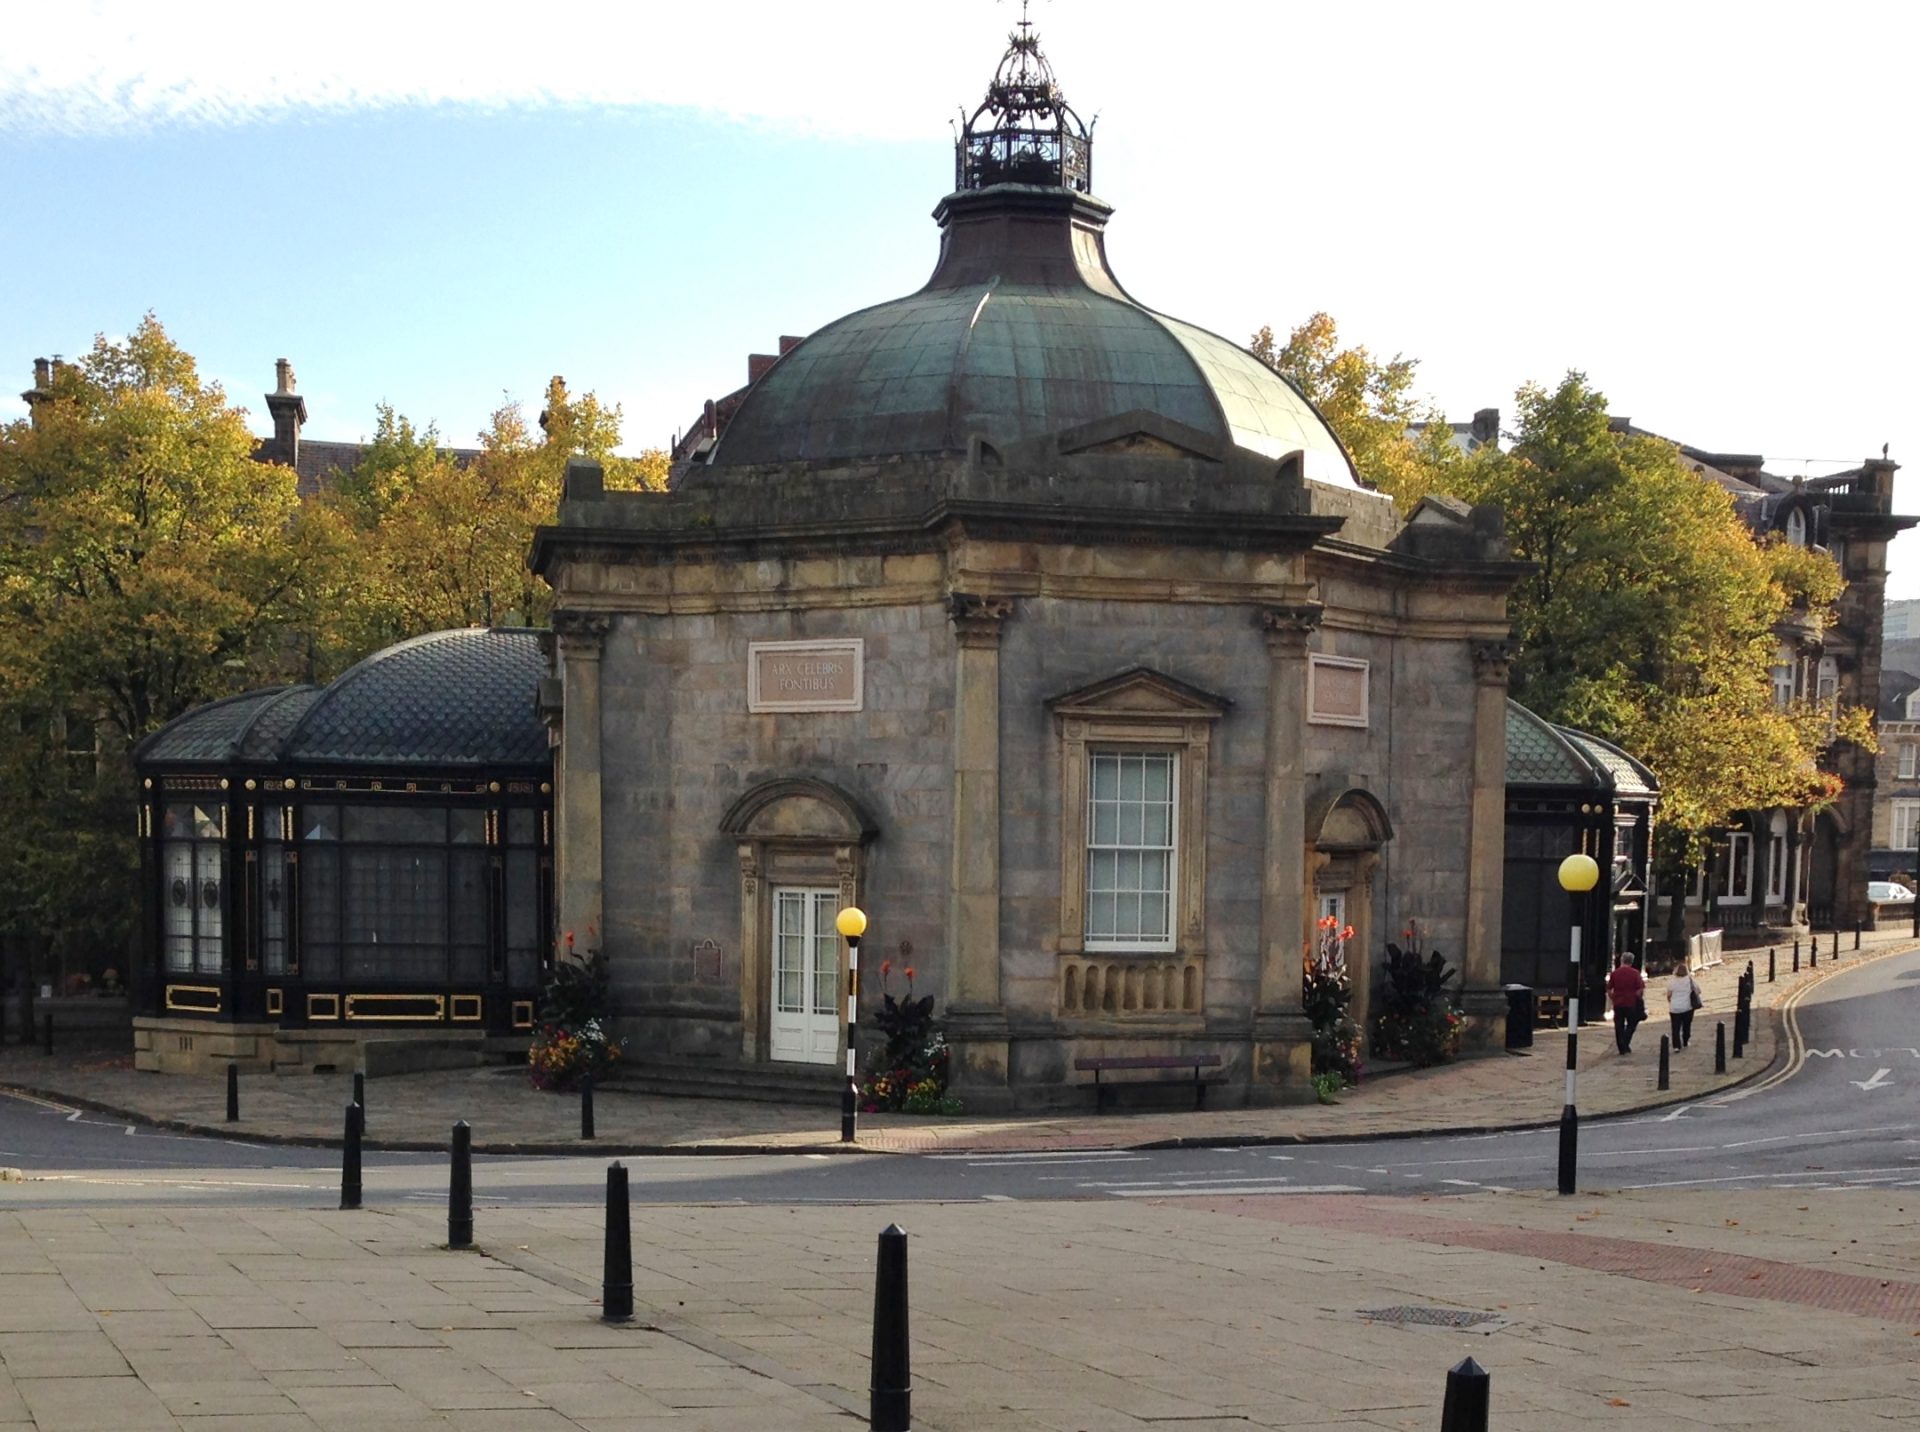 The Pump Room Harrogate New home on the cards for Harrogate's Tourist Information Centre